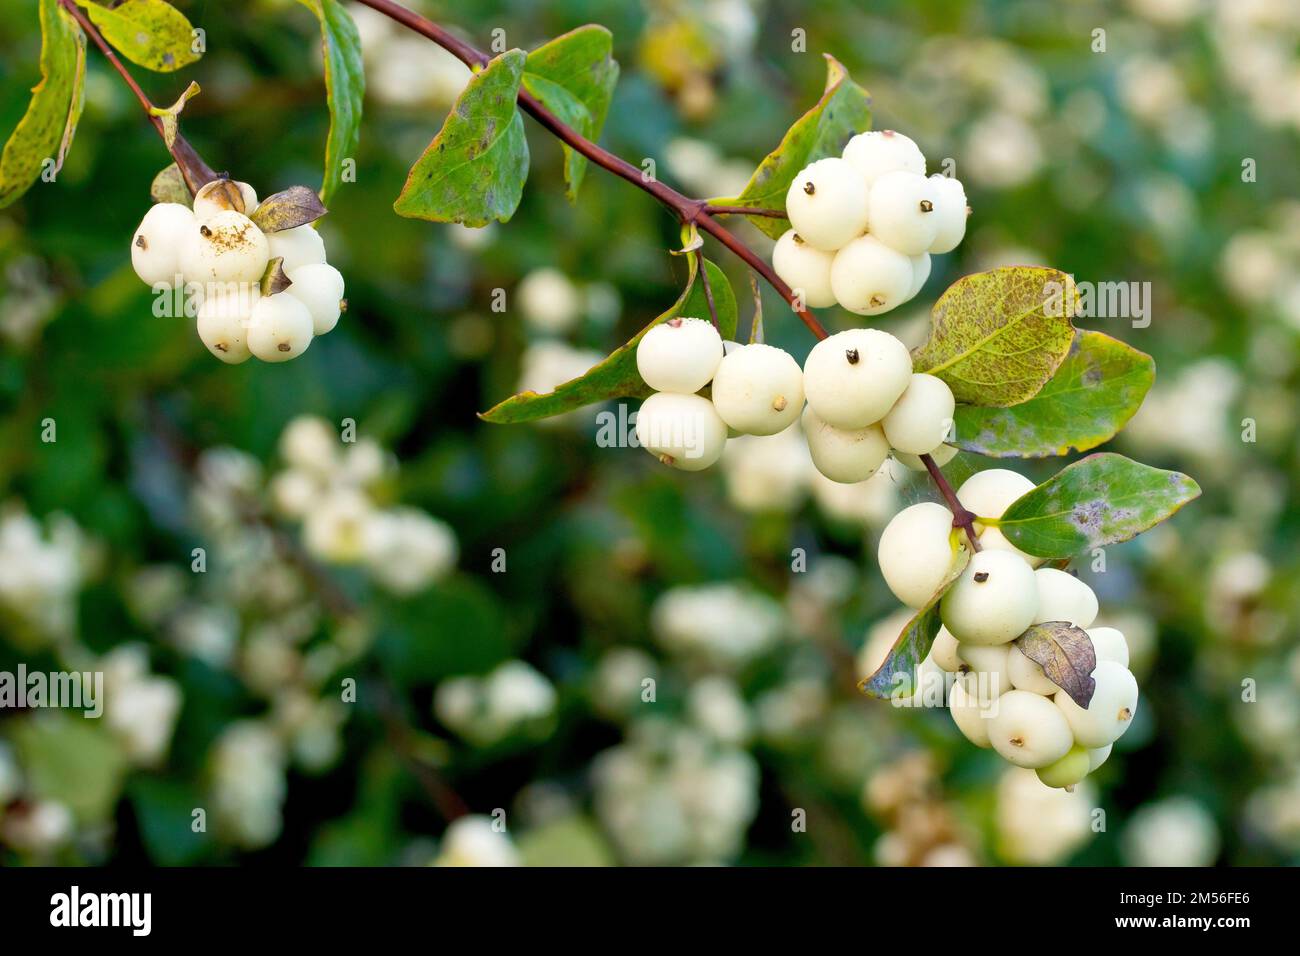 Clusters of small white berries grow on the branches of trees, nourished by  the forest's magical aura. these berries are carefully harvested during the  full moon and used in potions to enhance